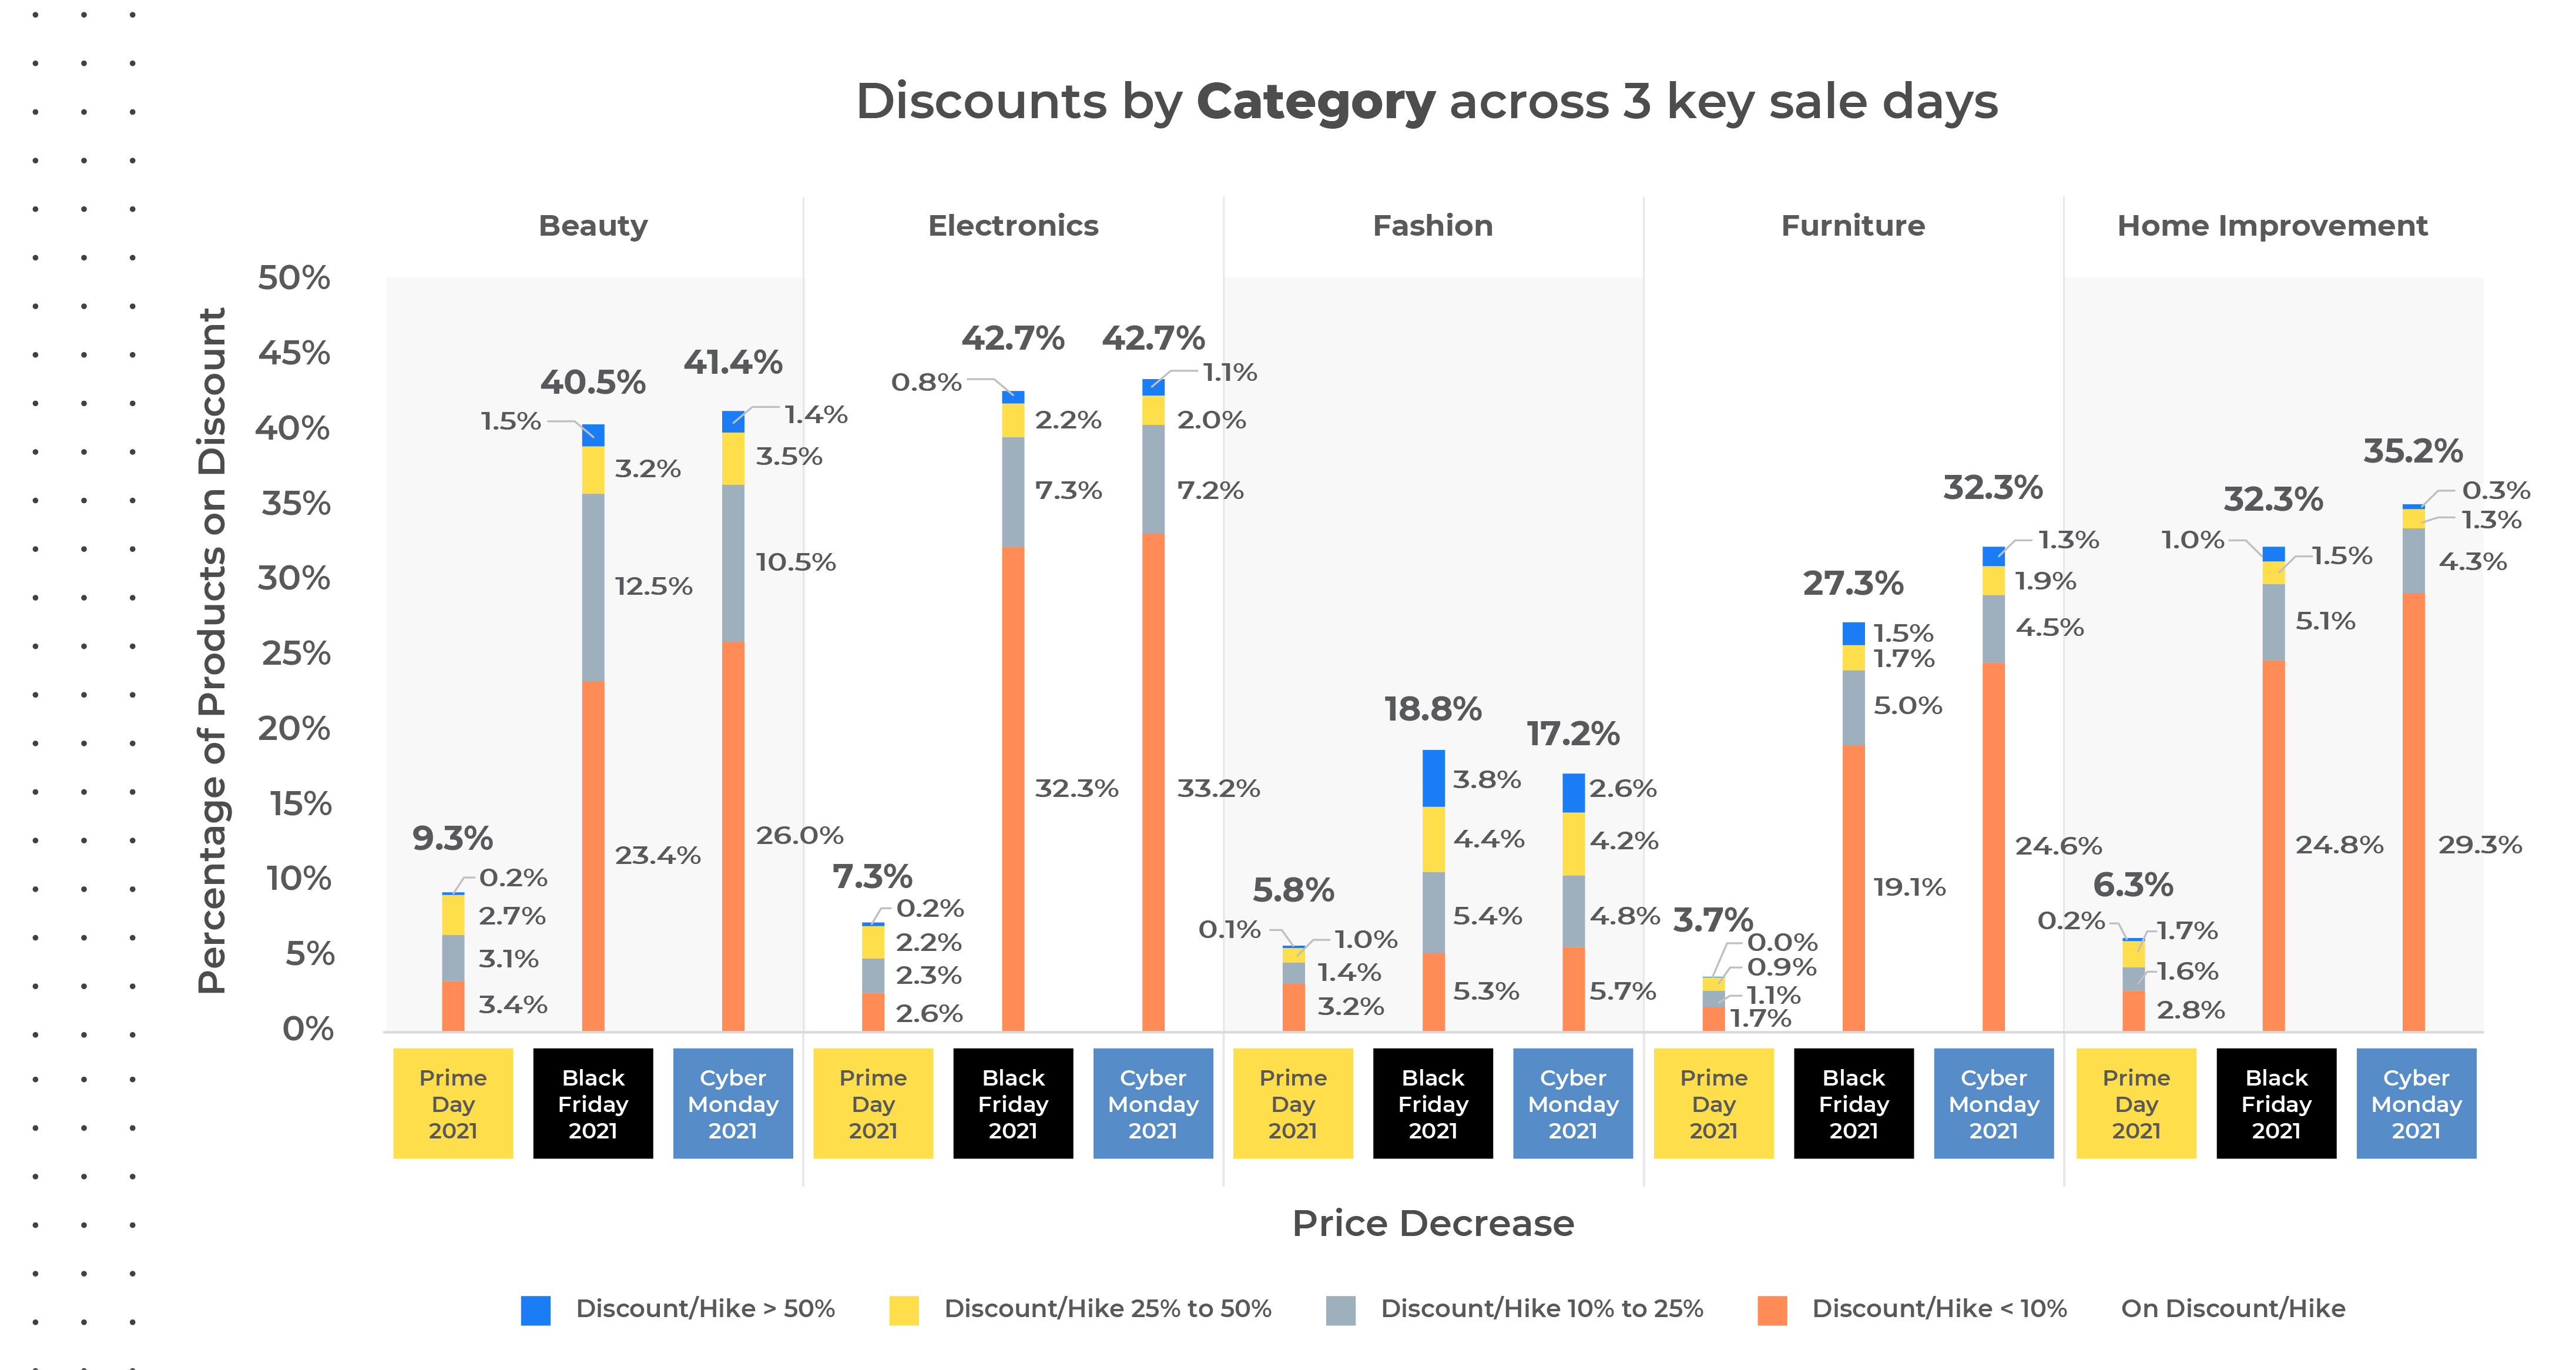 Discounts by category